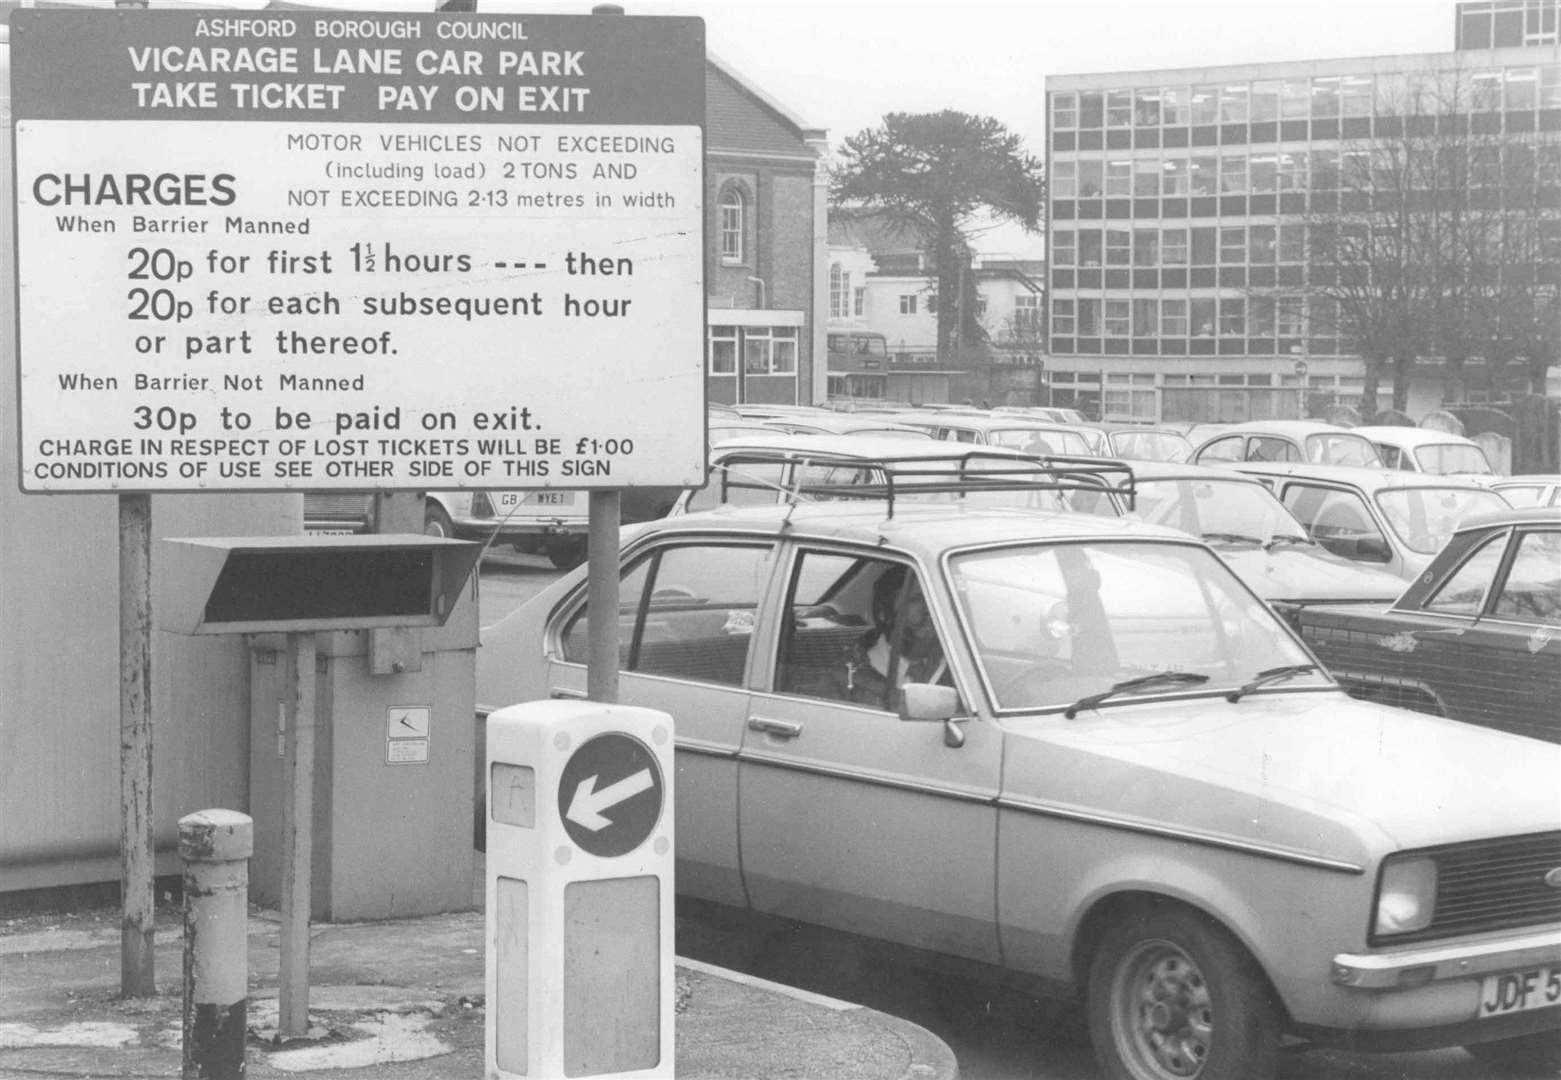 Parking charges attracted protests in Ashford in 1982 when the cost was increased in Vicarage Lane and included a daily charge for town centre parking of £2, which was considered outrageous. Picture: Images of Ashford by Mike Bennett